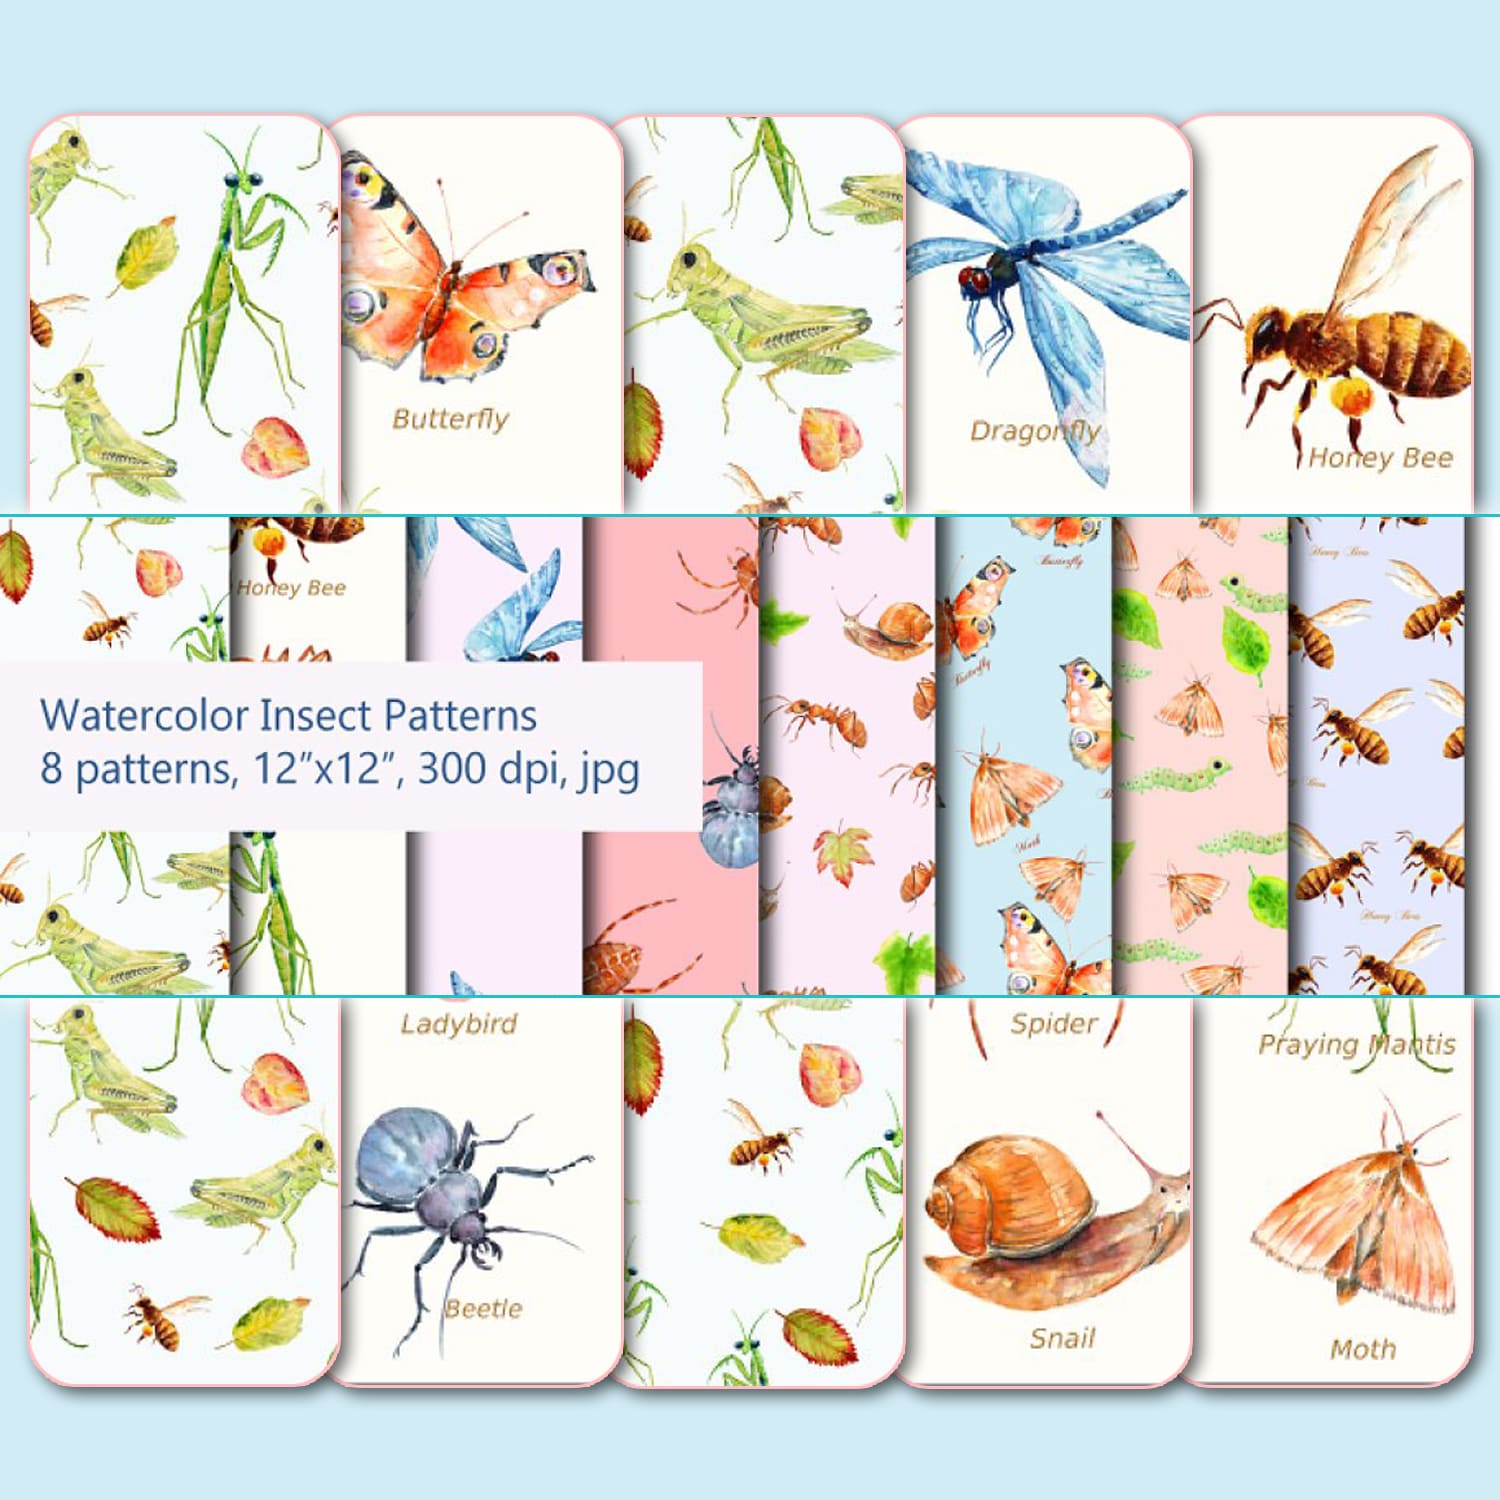 Watercolor Insect Pattern.